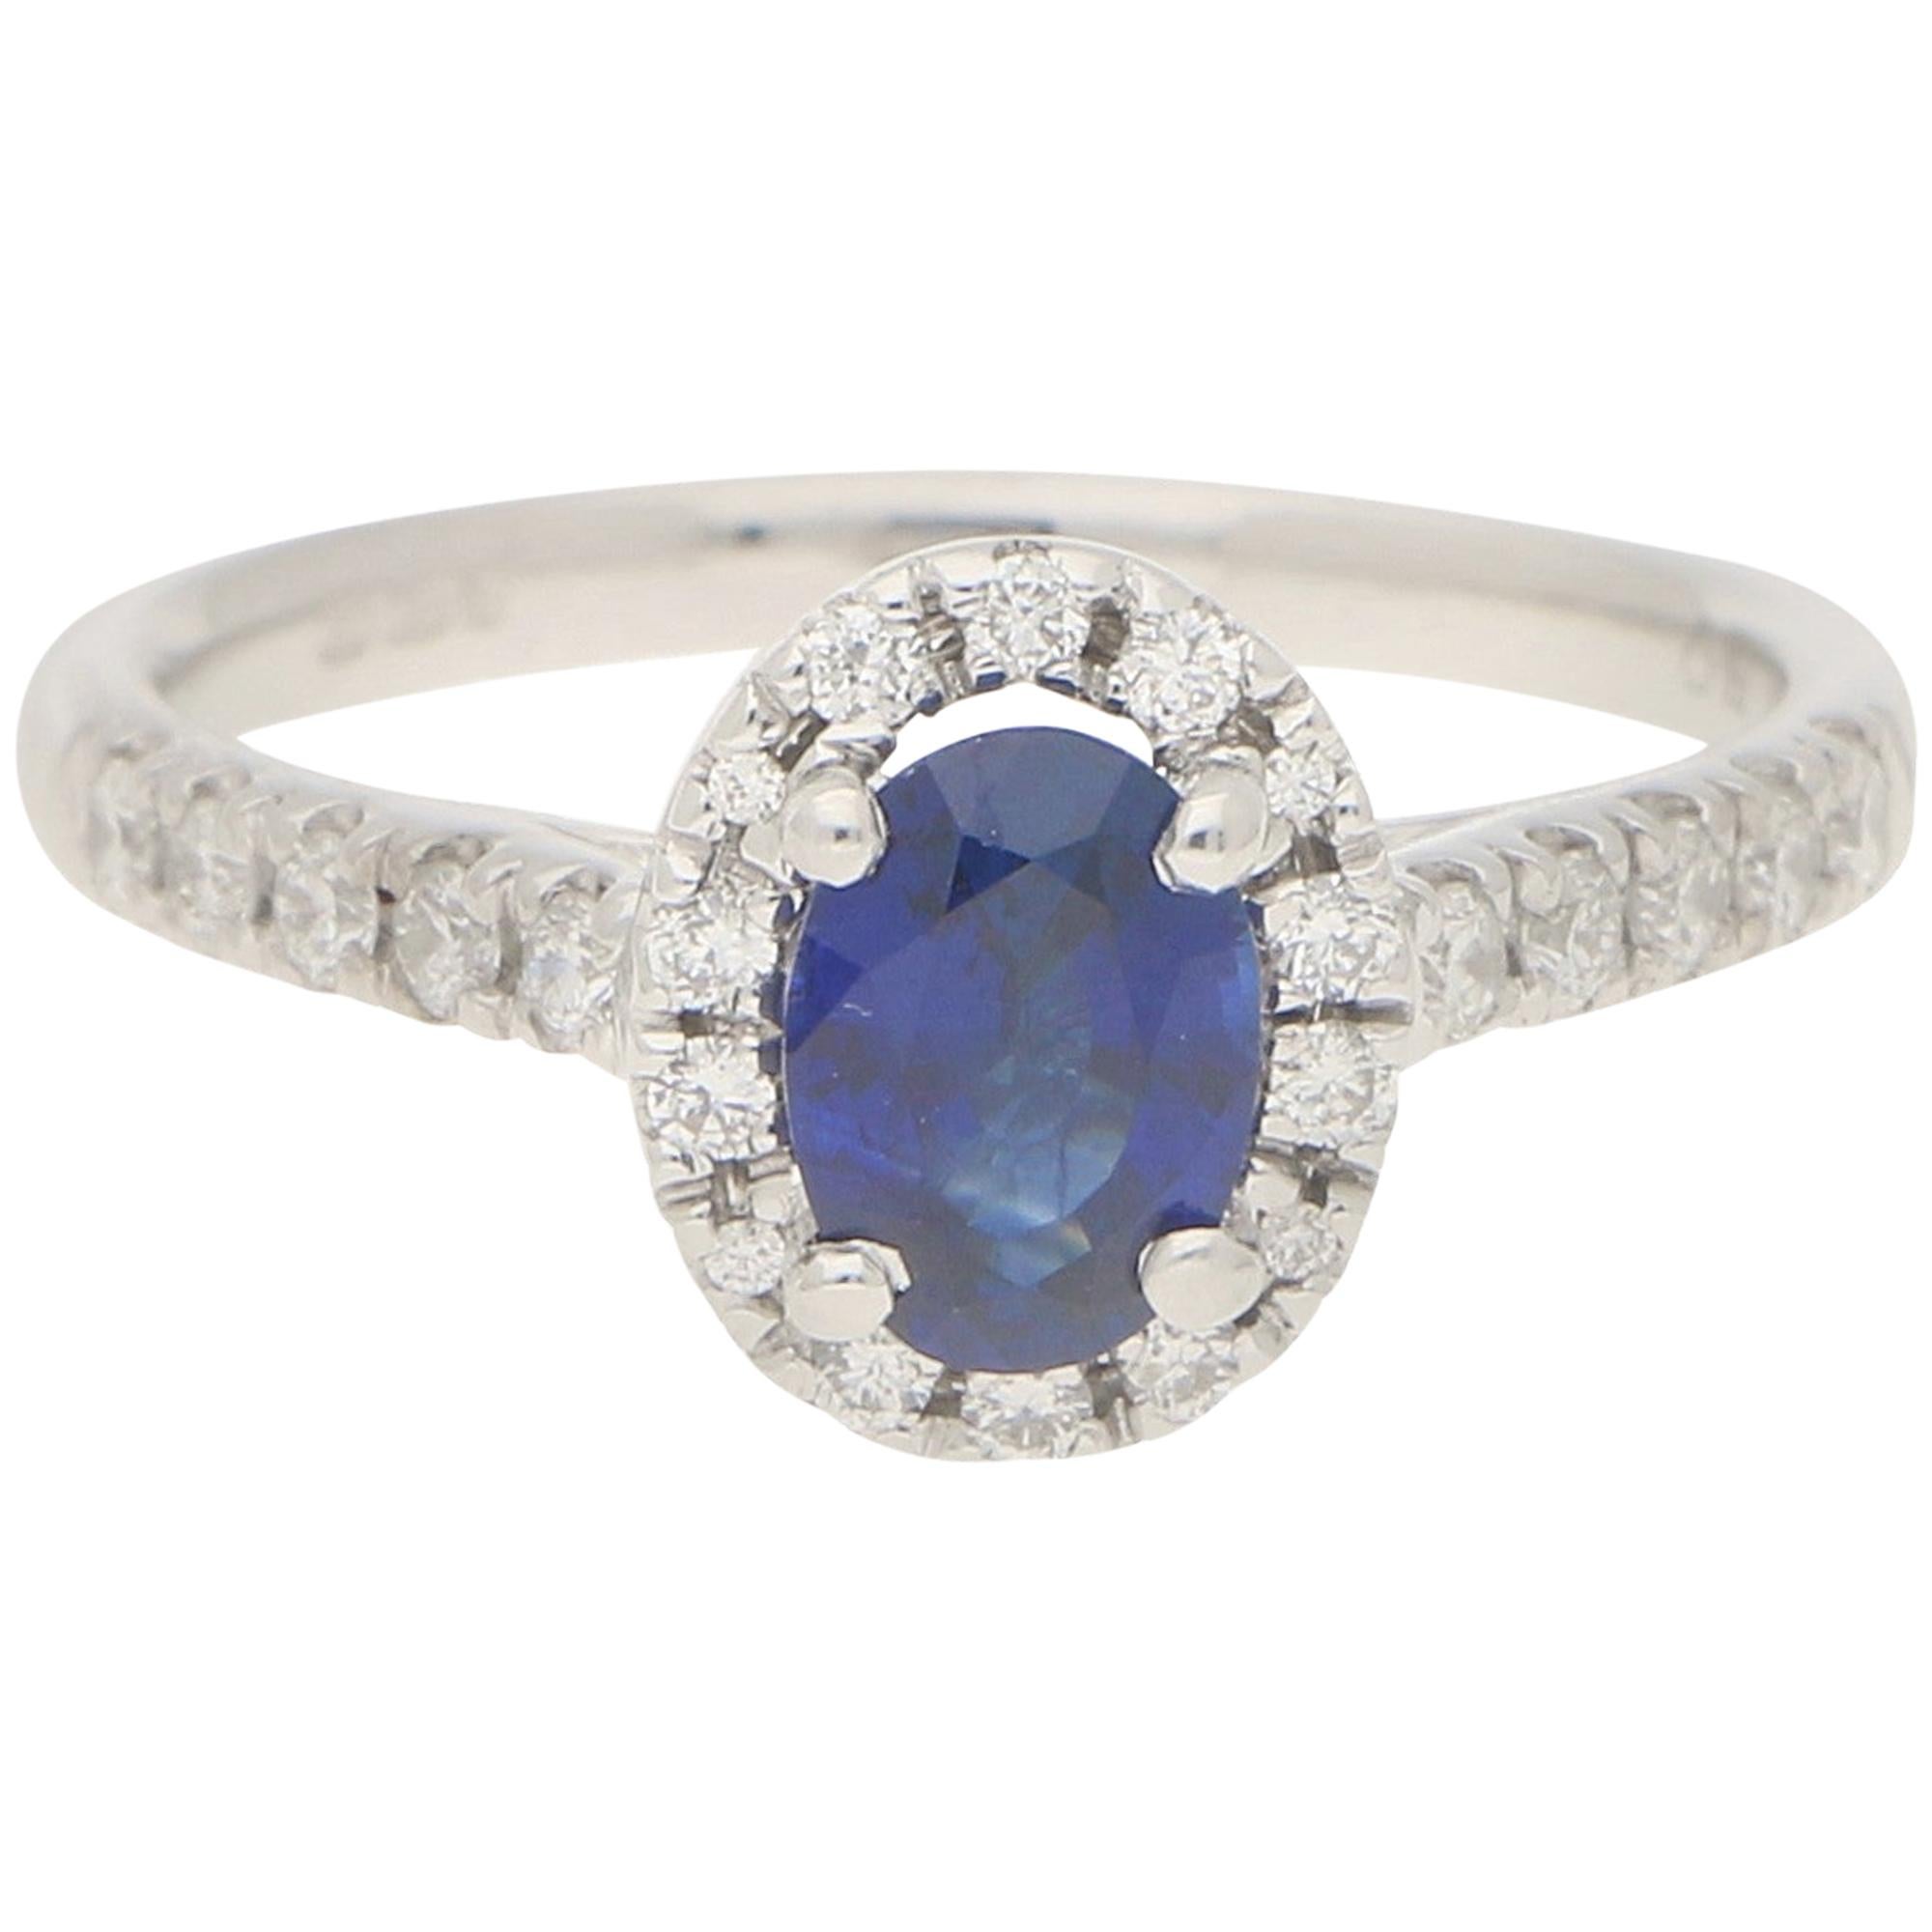 Sapphire and Diamond Halo Cluster Engagement Ring Set in 18 Karat White Gold